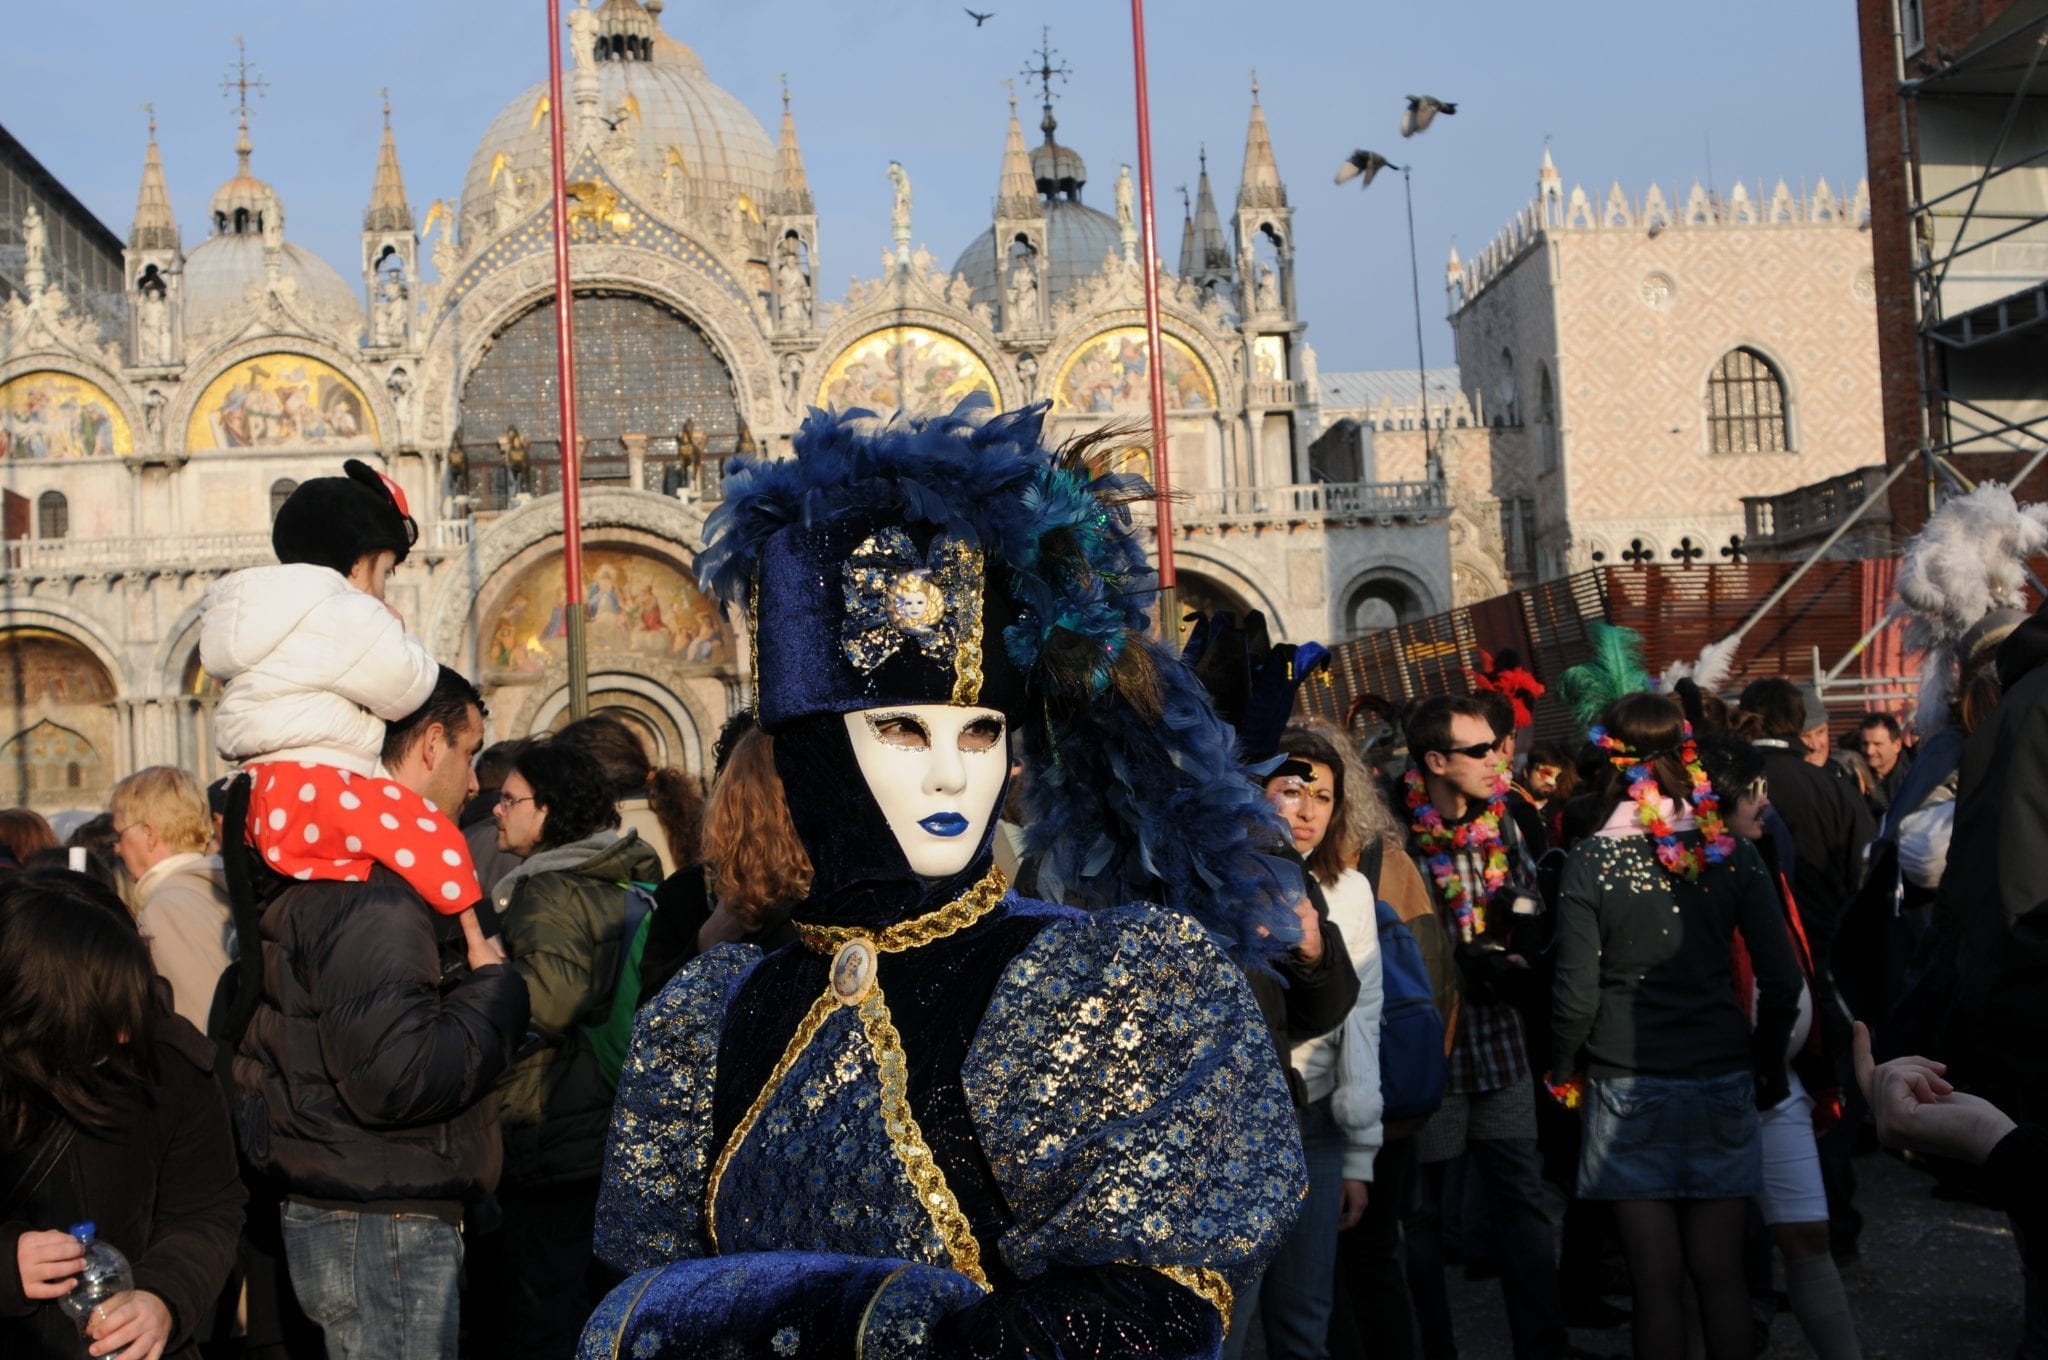 Carnevale All About Carnival In Venice Venetian Masks More